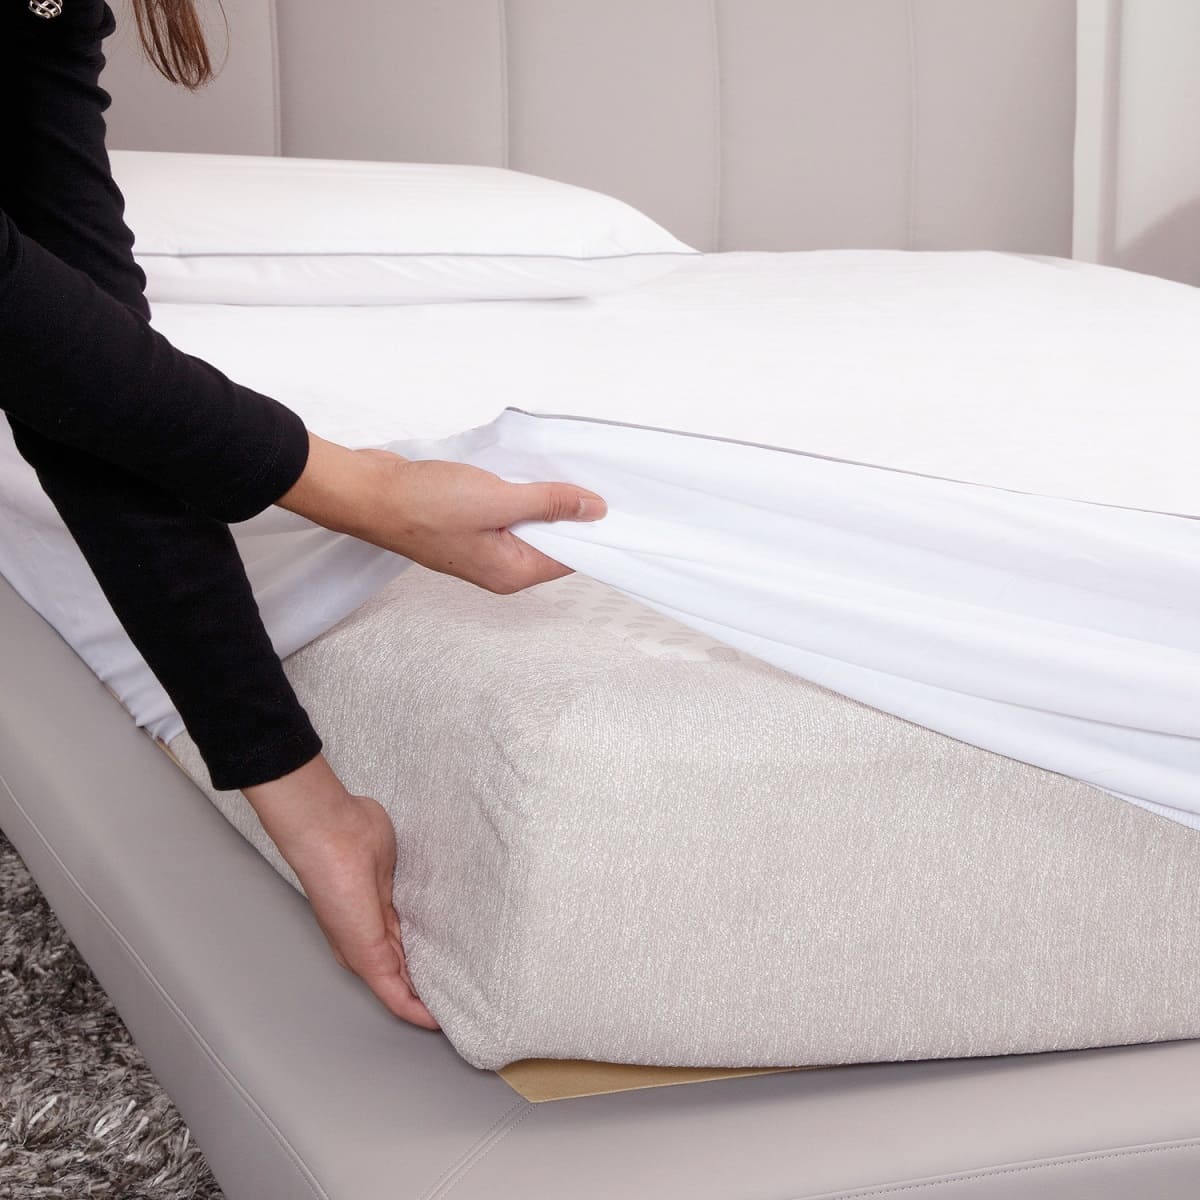 Can You Wash A Mattress Protector? 4 Steps For The Perfect Clean